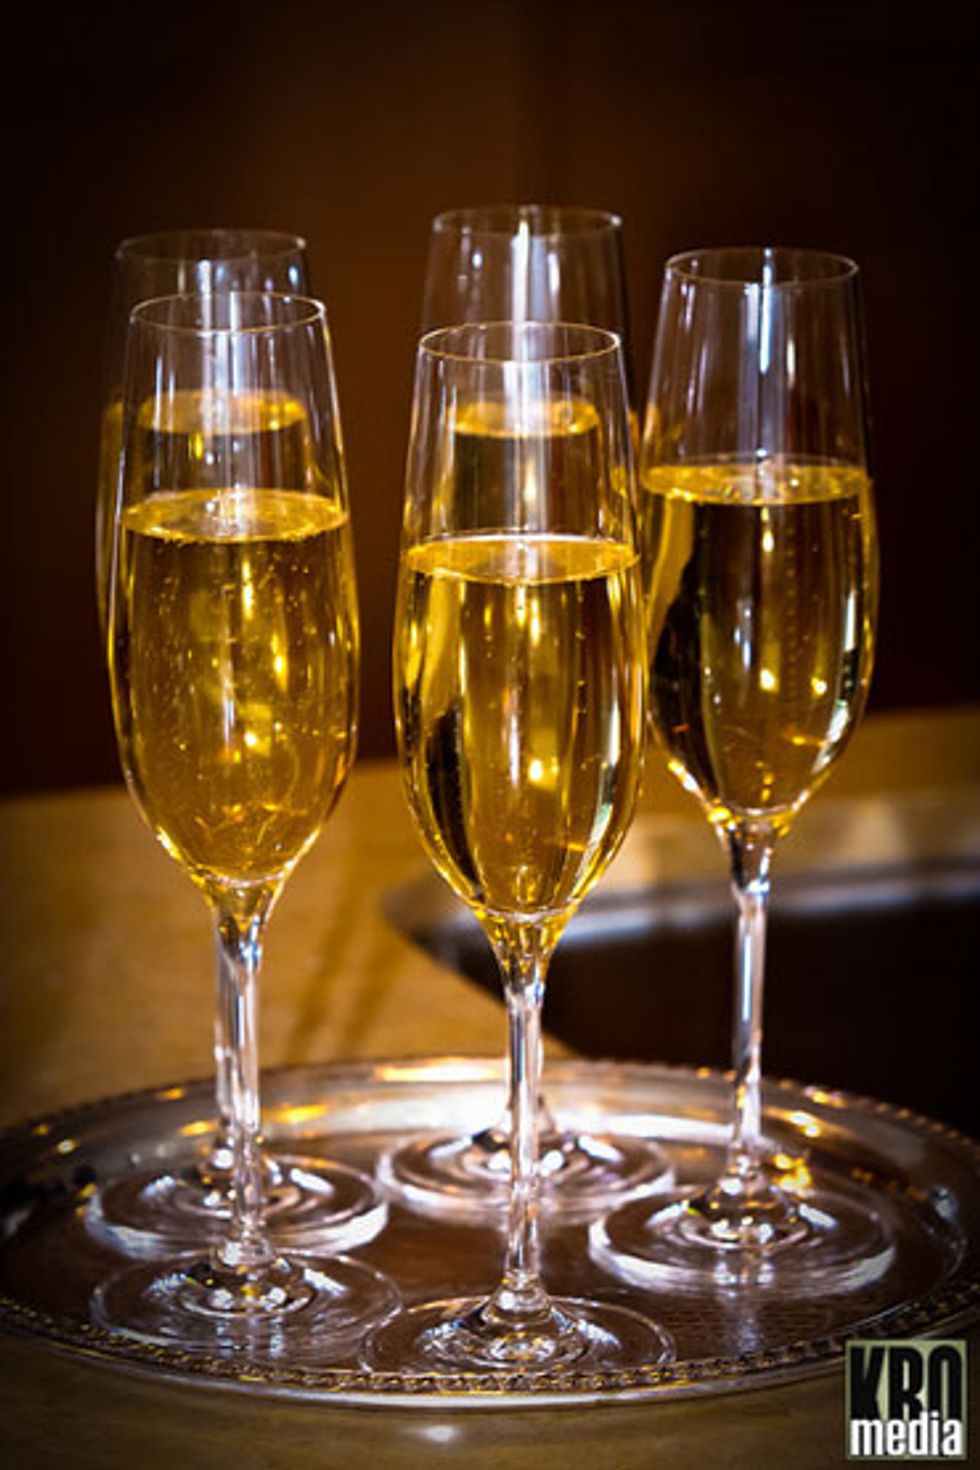 The Bubble Lounge Gets Serious About Champagne